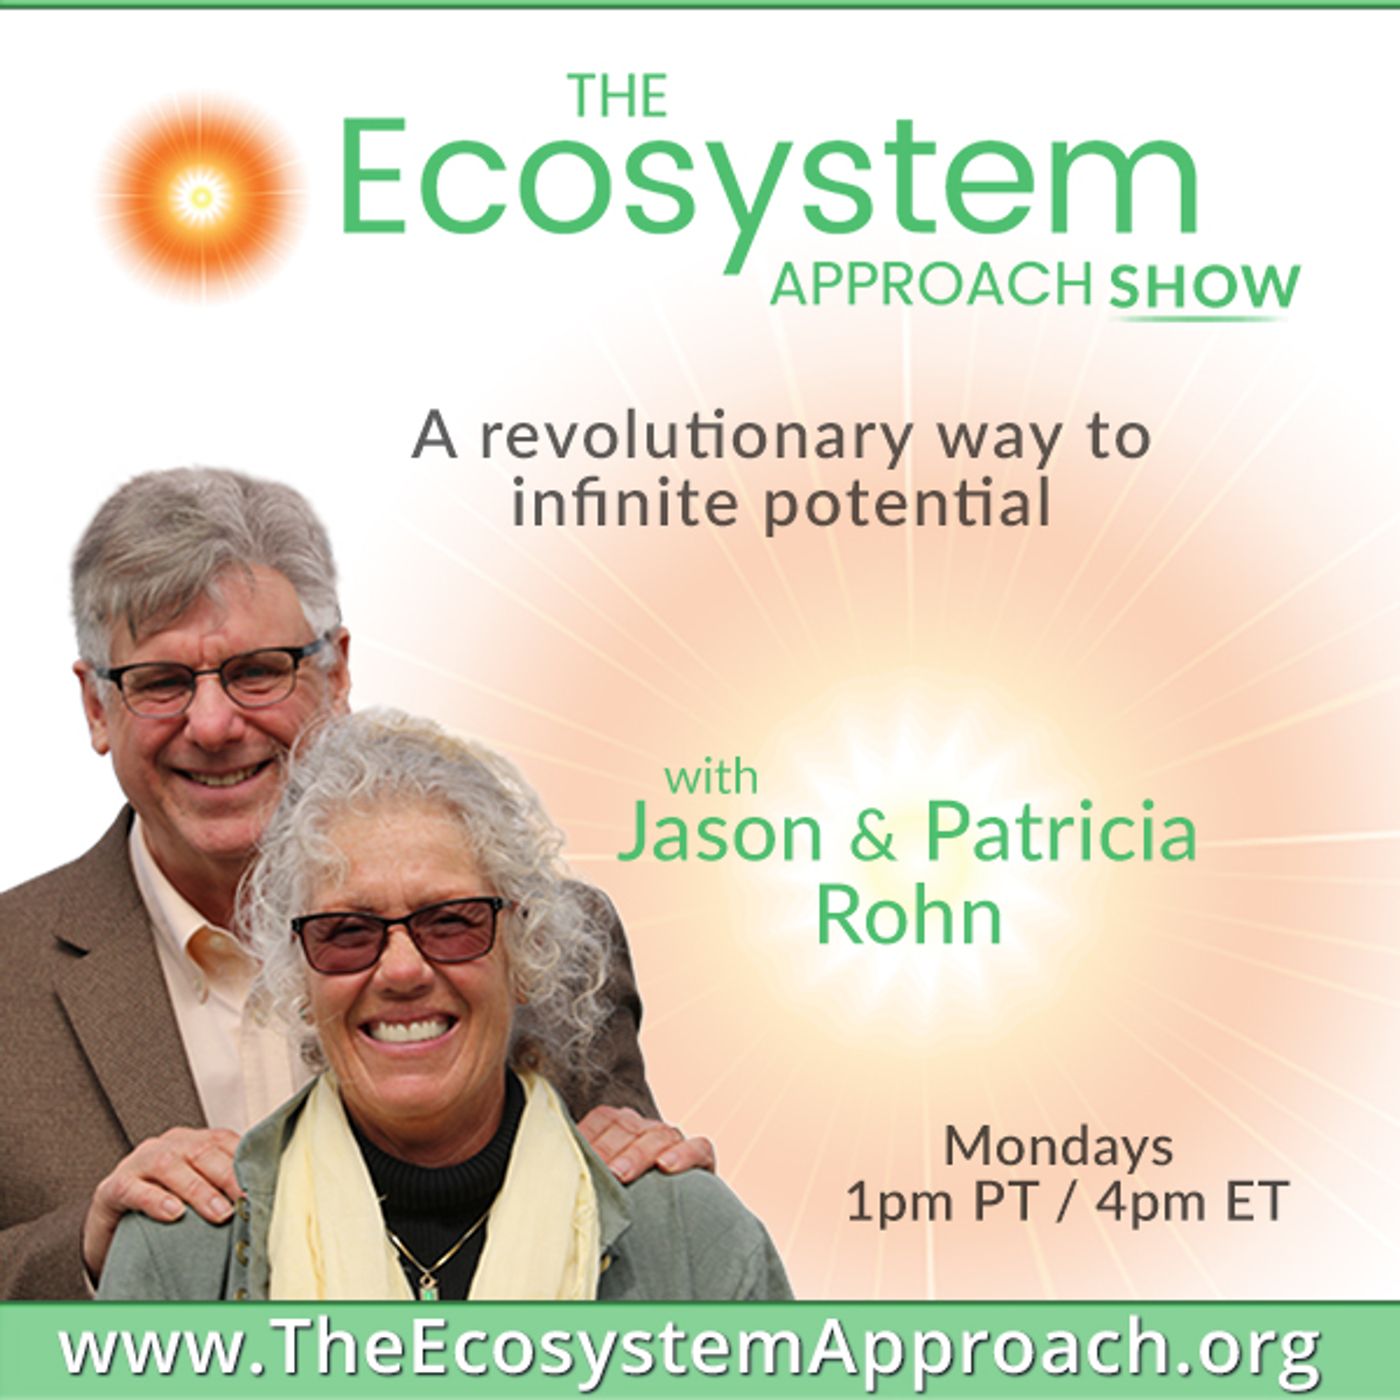 The Ecosystem Approach Show